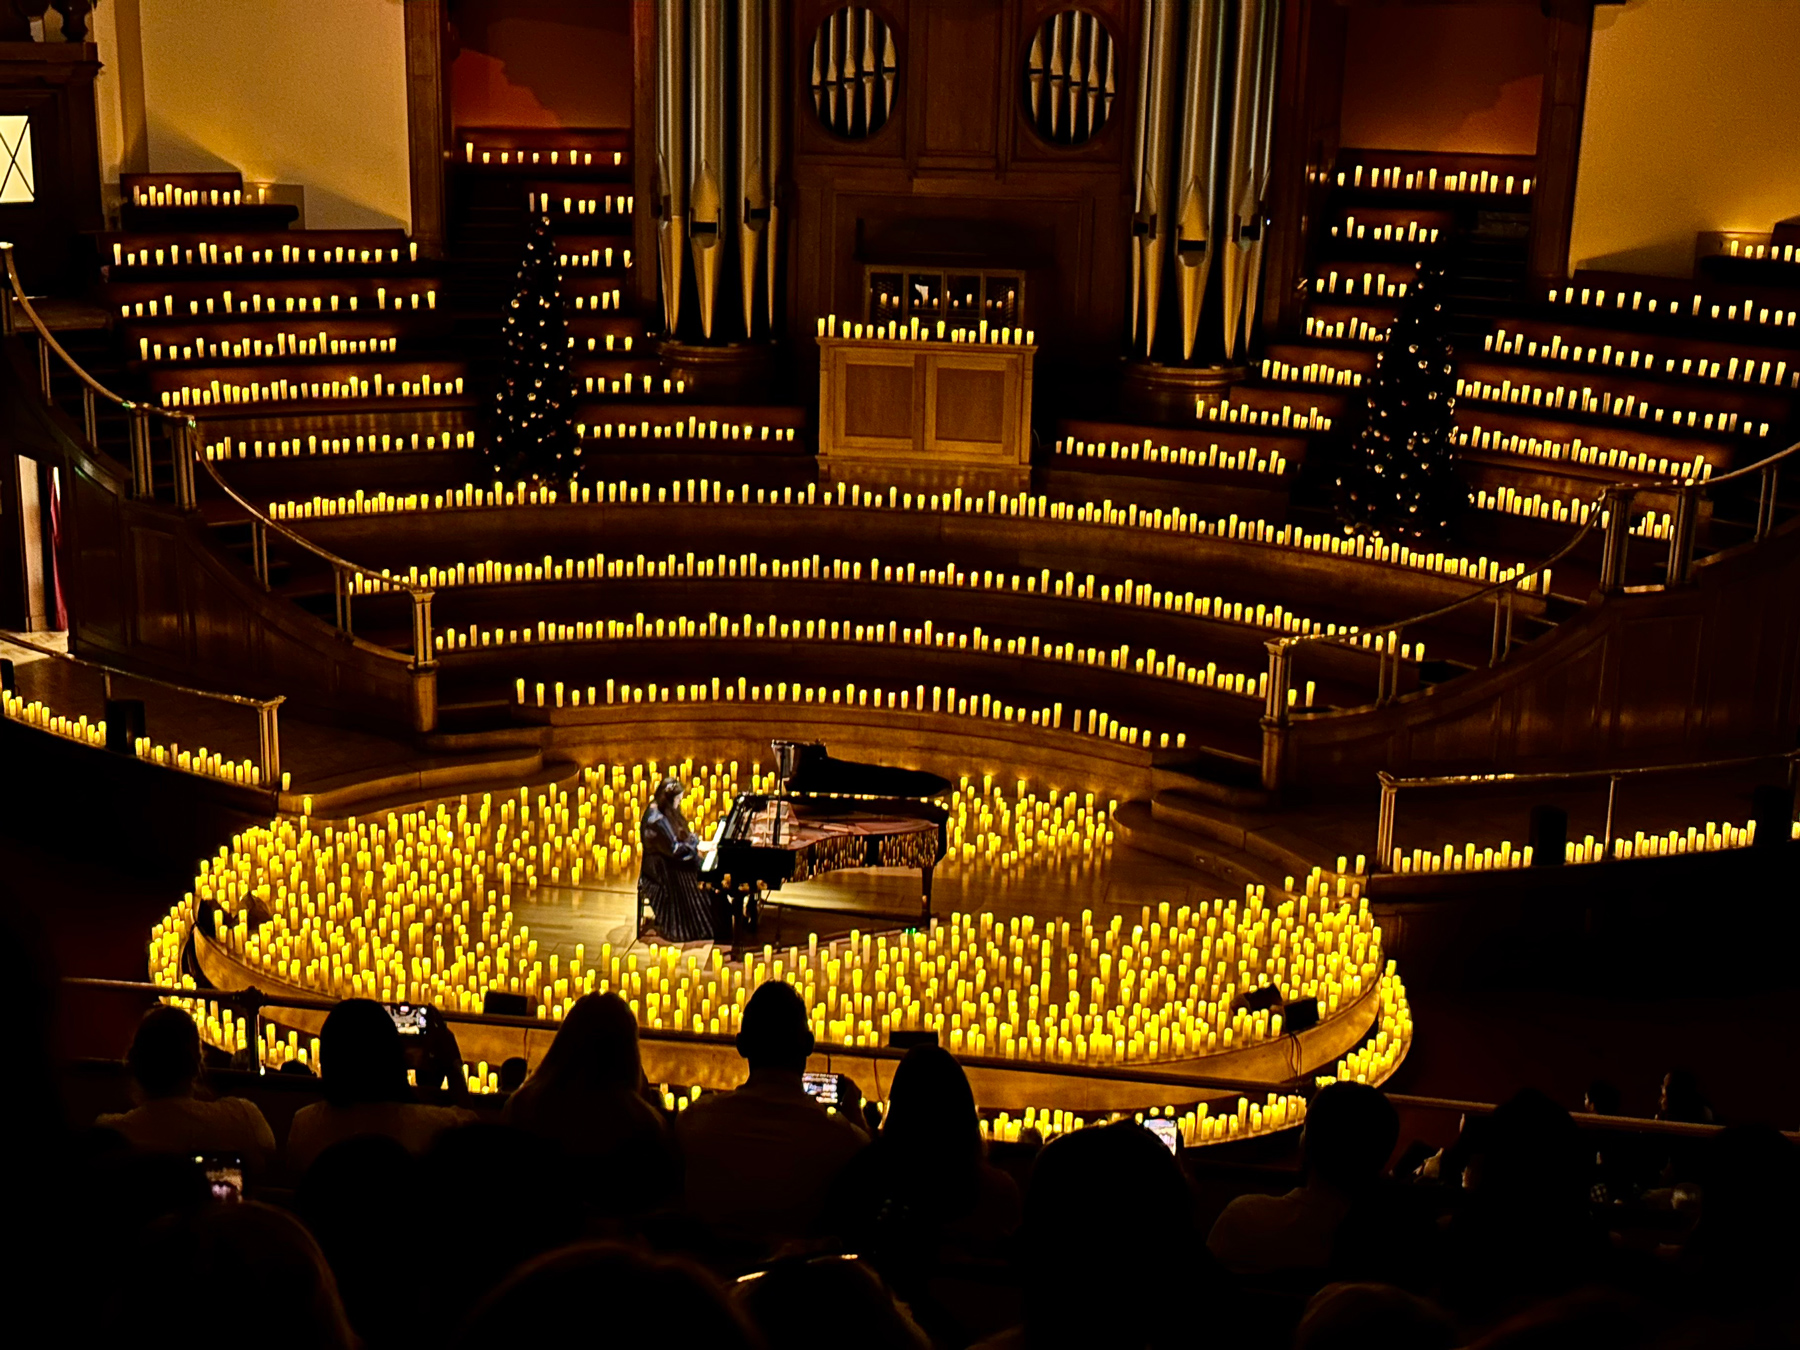 A view of a round stage covered in candles, with a grand piano in the center. Framed by a large pipe organ and candles covering the stepped choir seating.